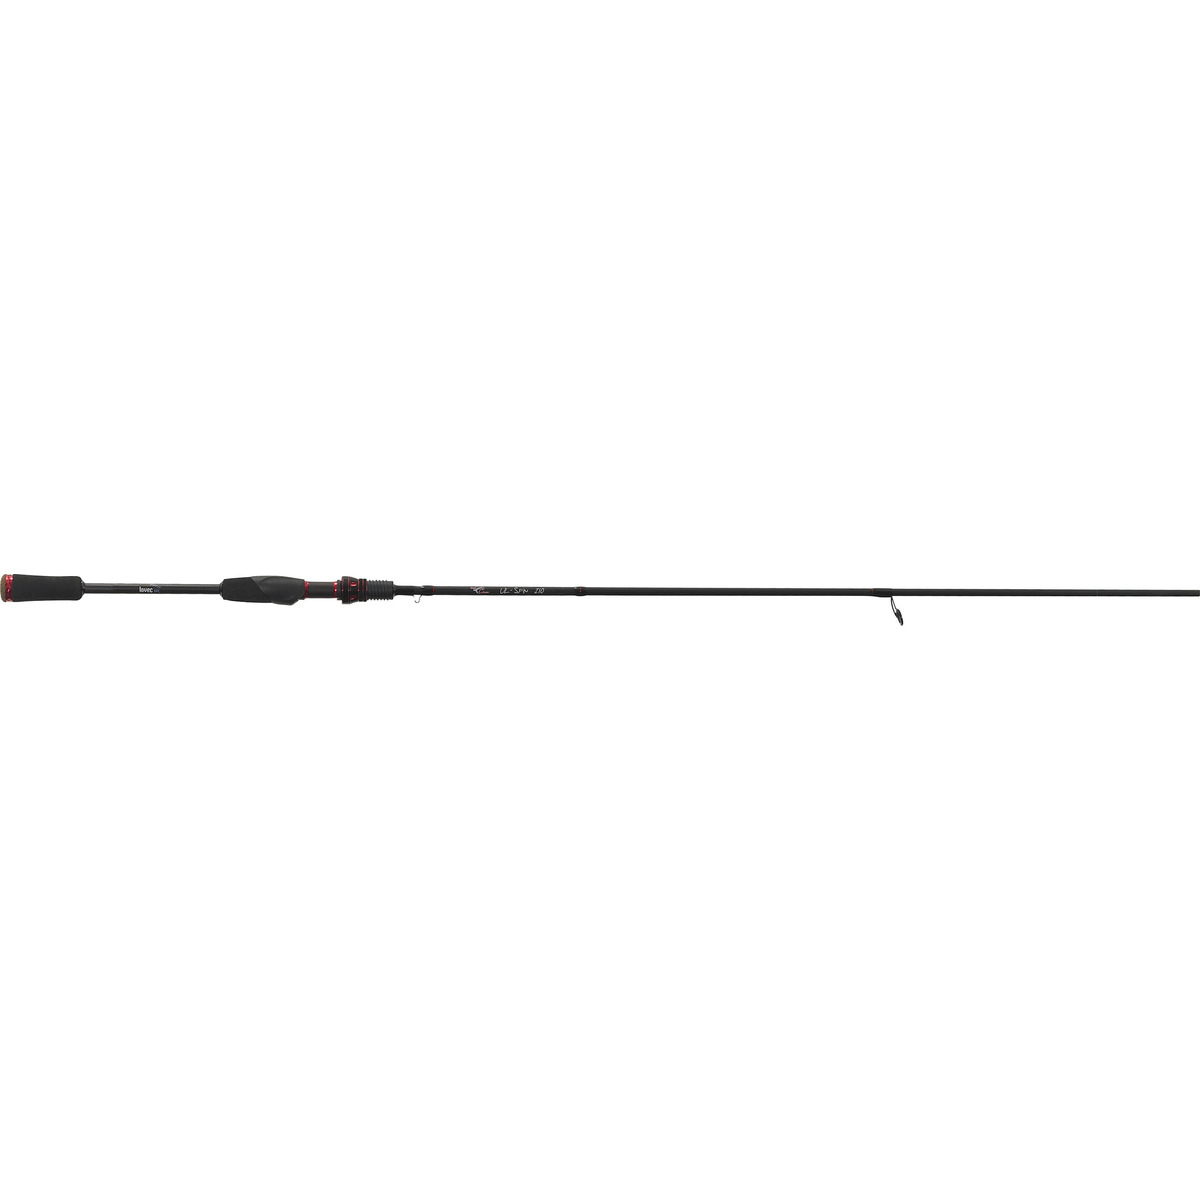 Iron Claw Lovec Rapy S - 180 cm - 2-8 g